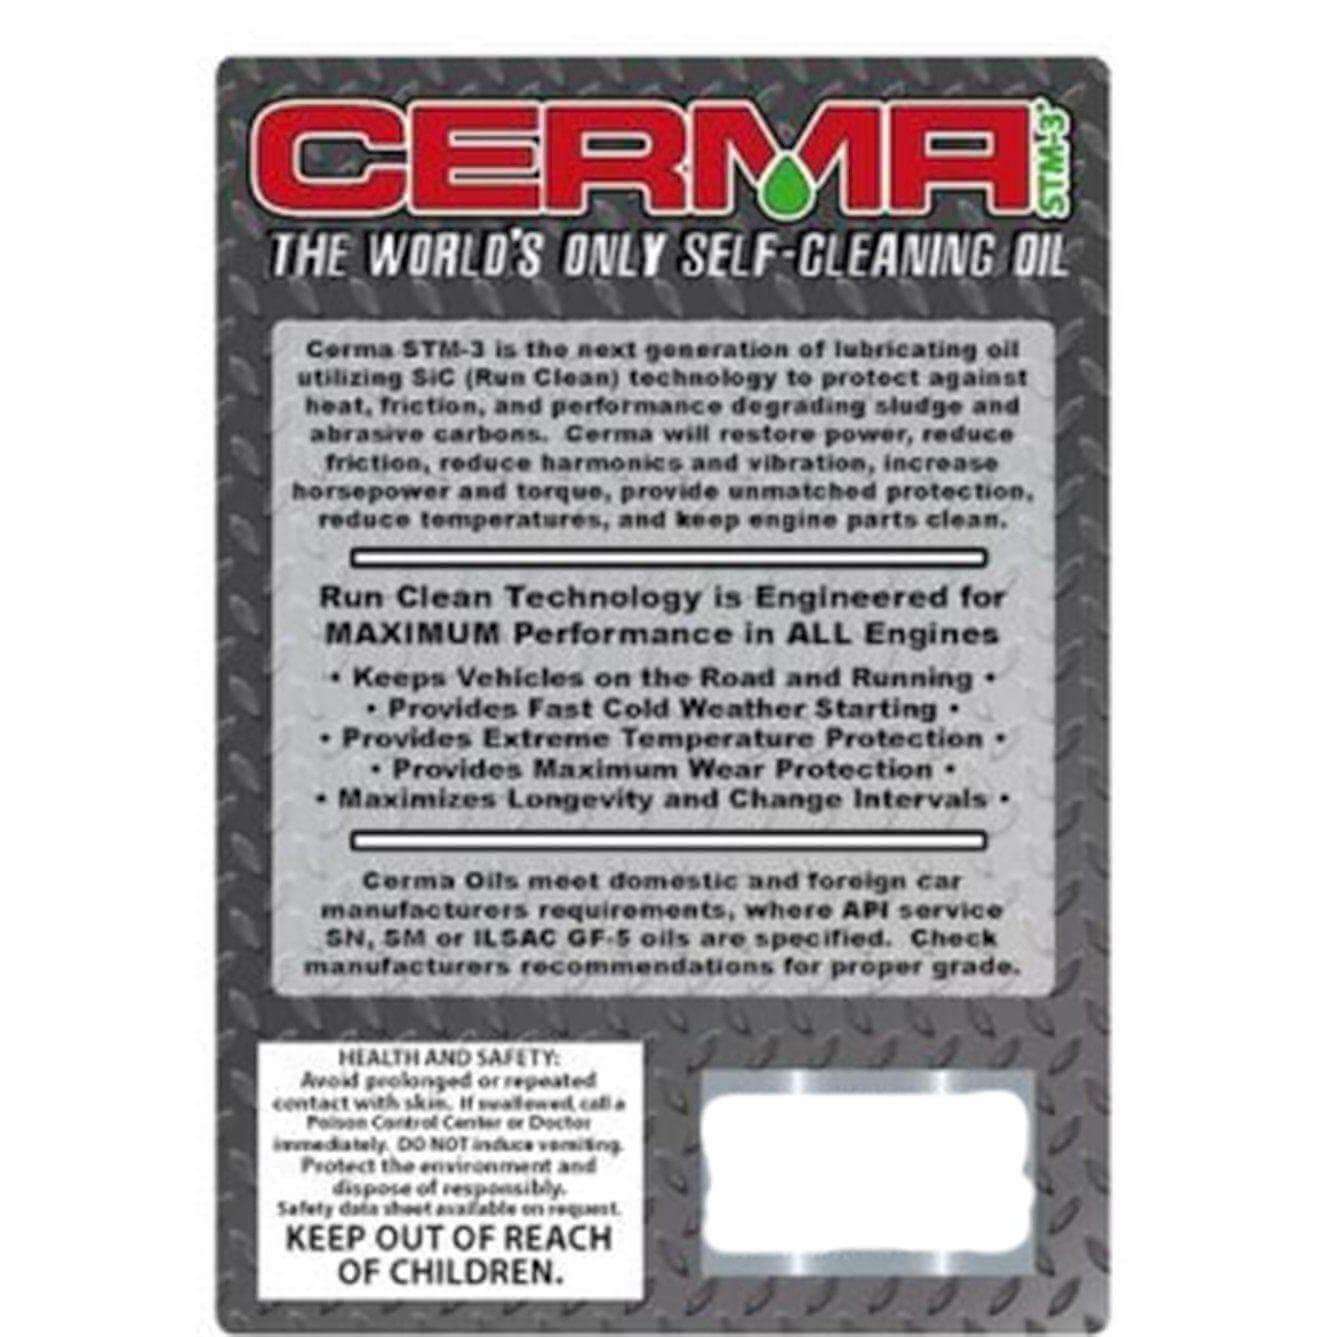 Cermax Ceramic 0w-20W Synthetic Motor Oil at $18.11 only from cermatreatment.com